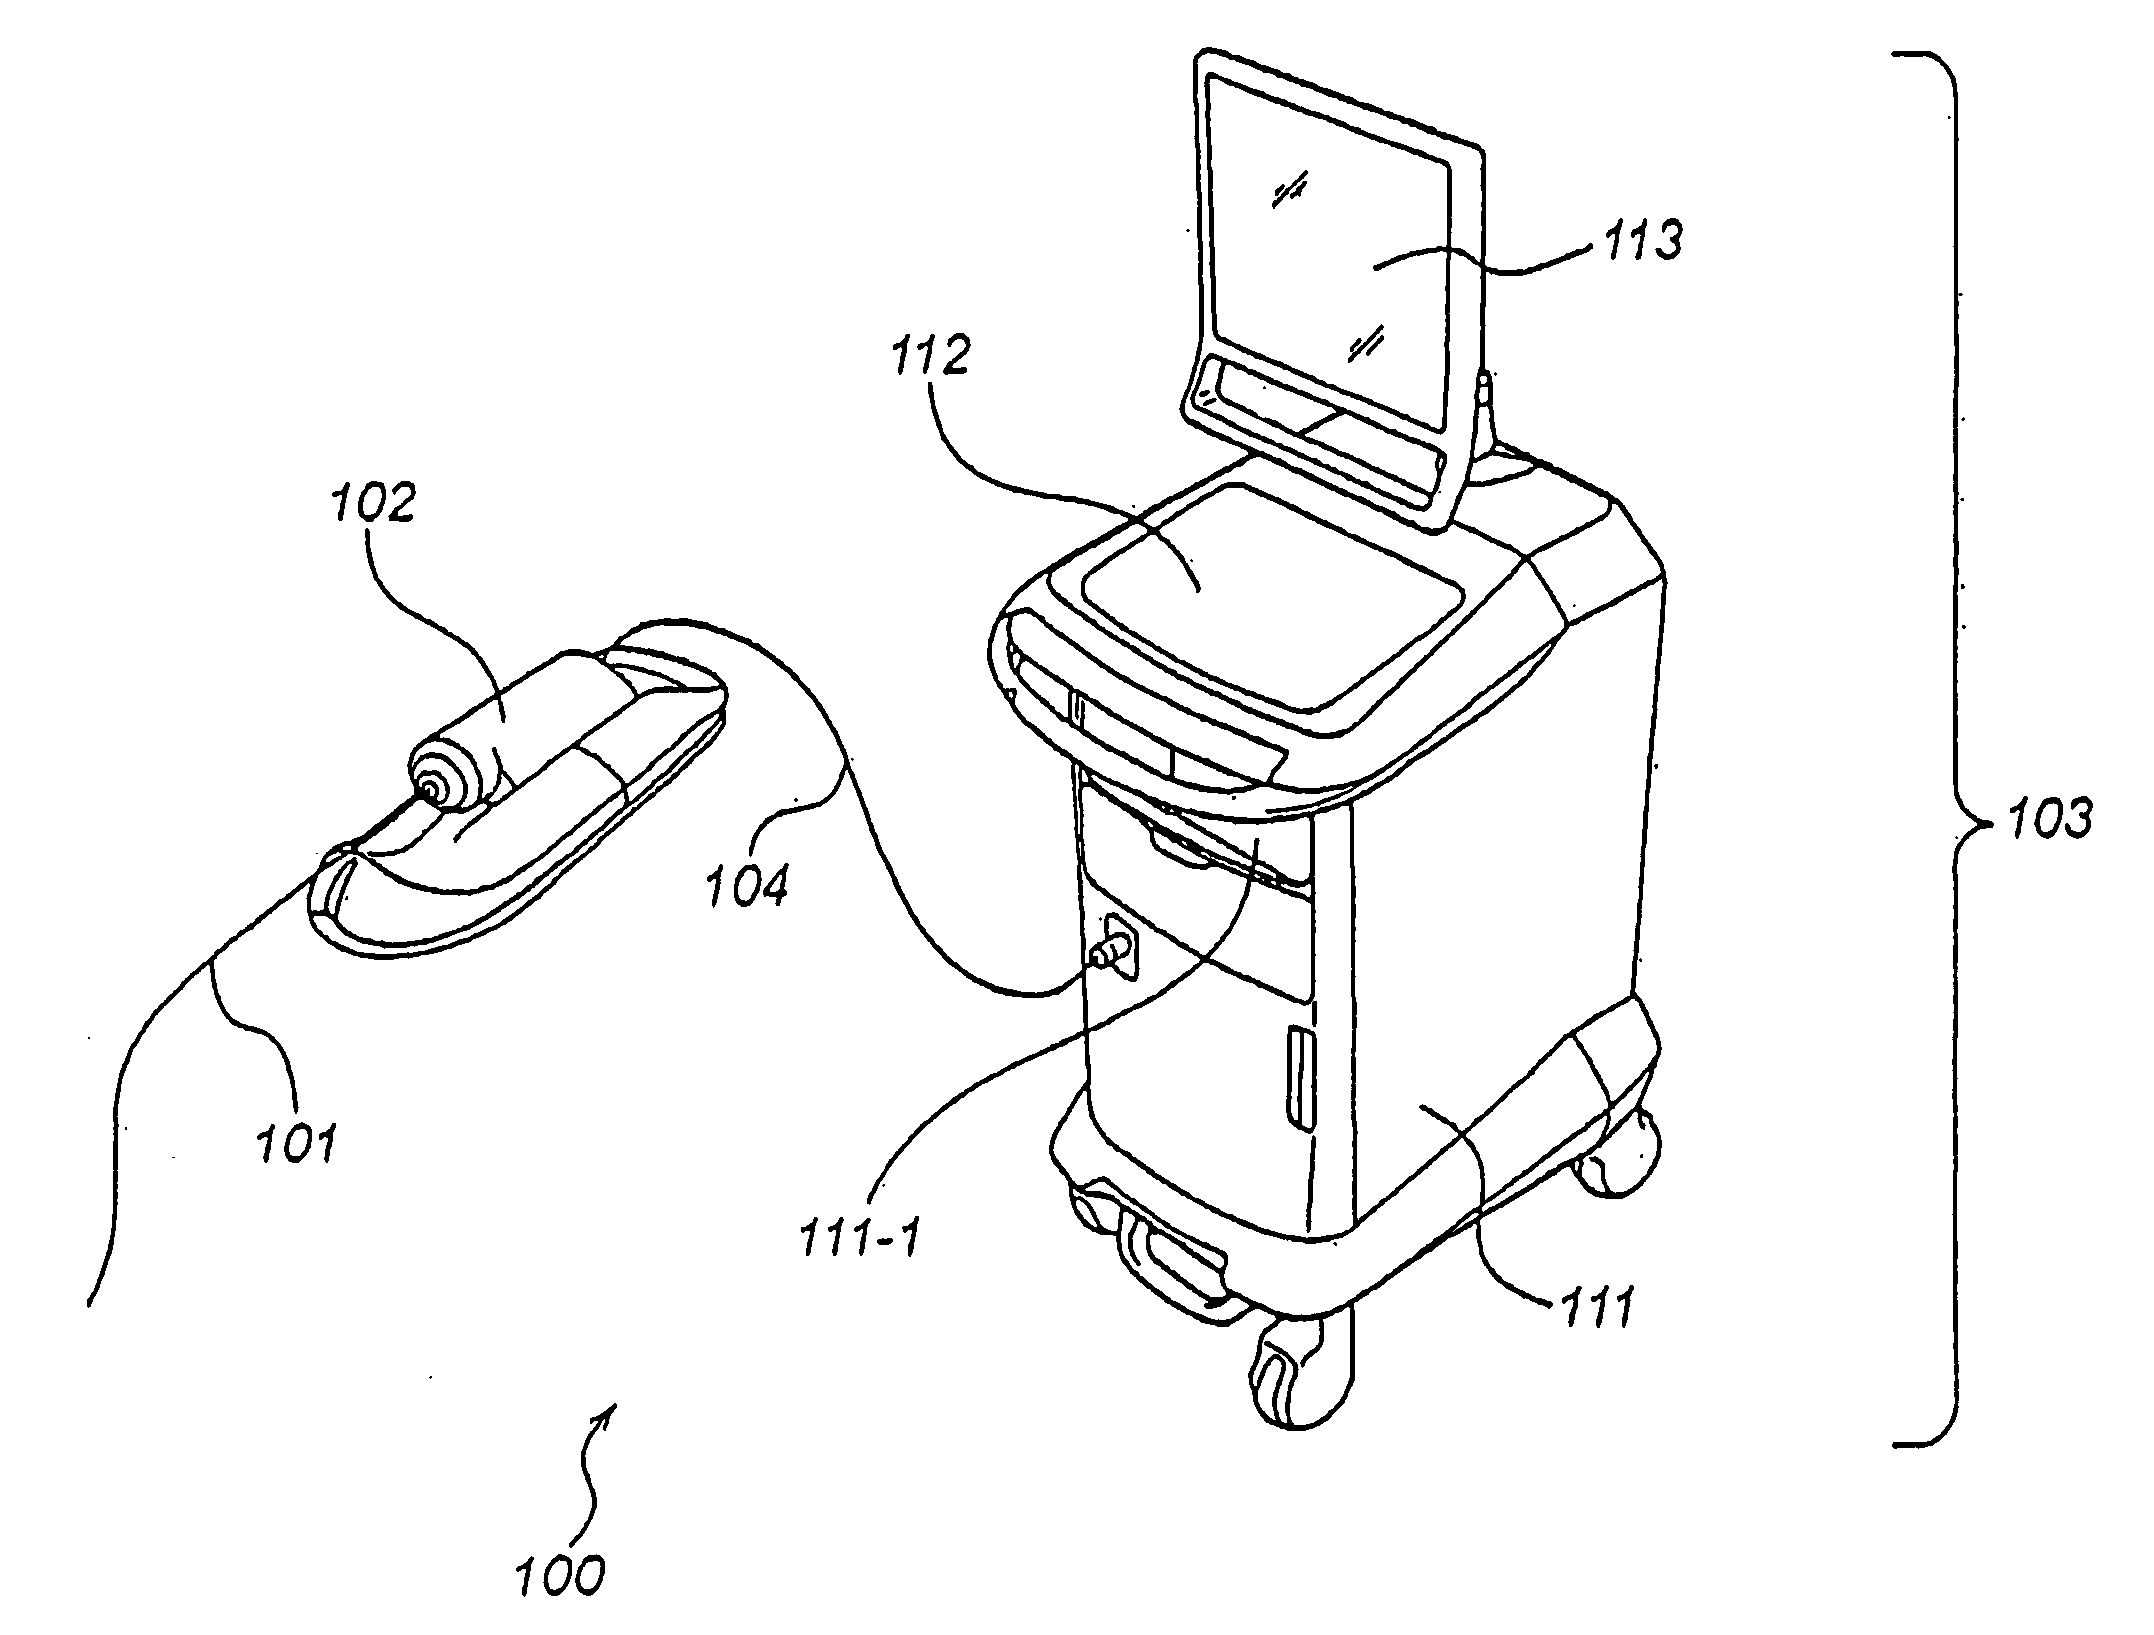 Probe, image diagnostic system and catheter